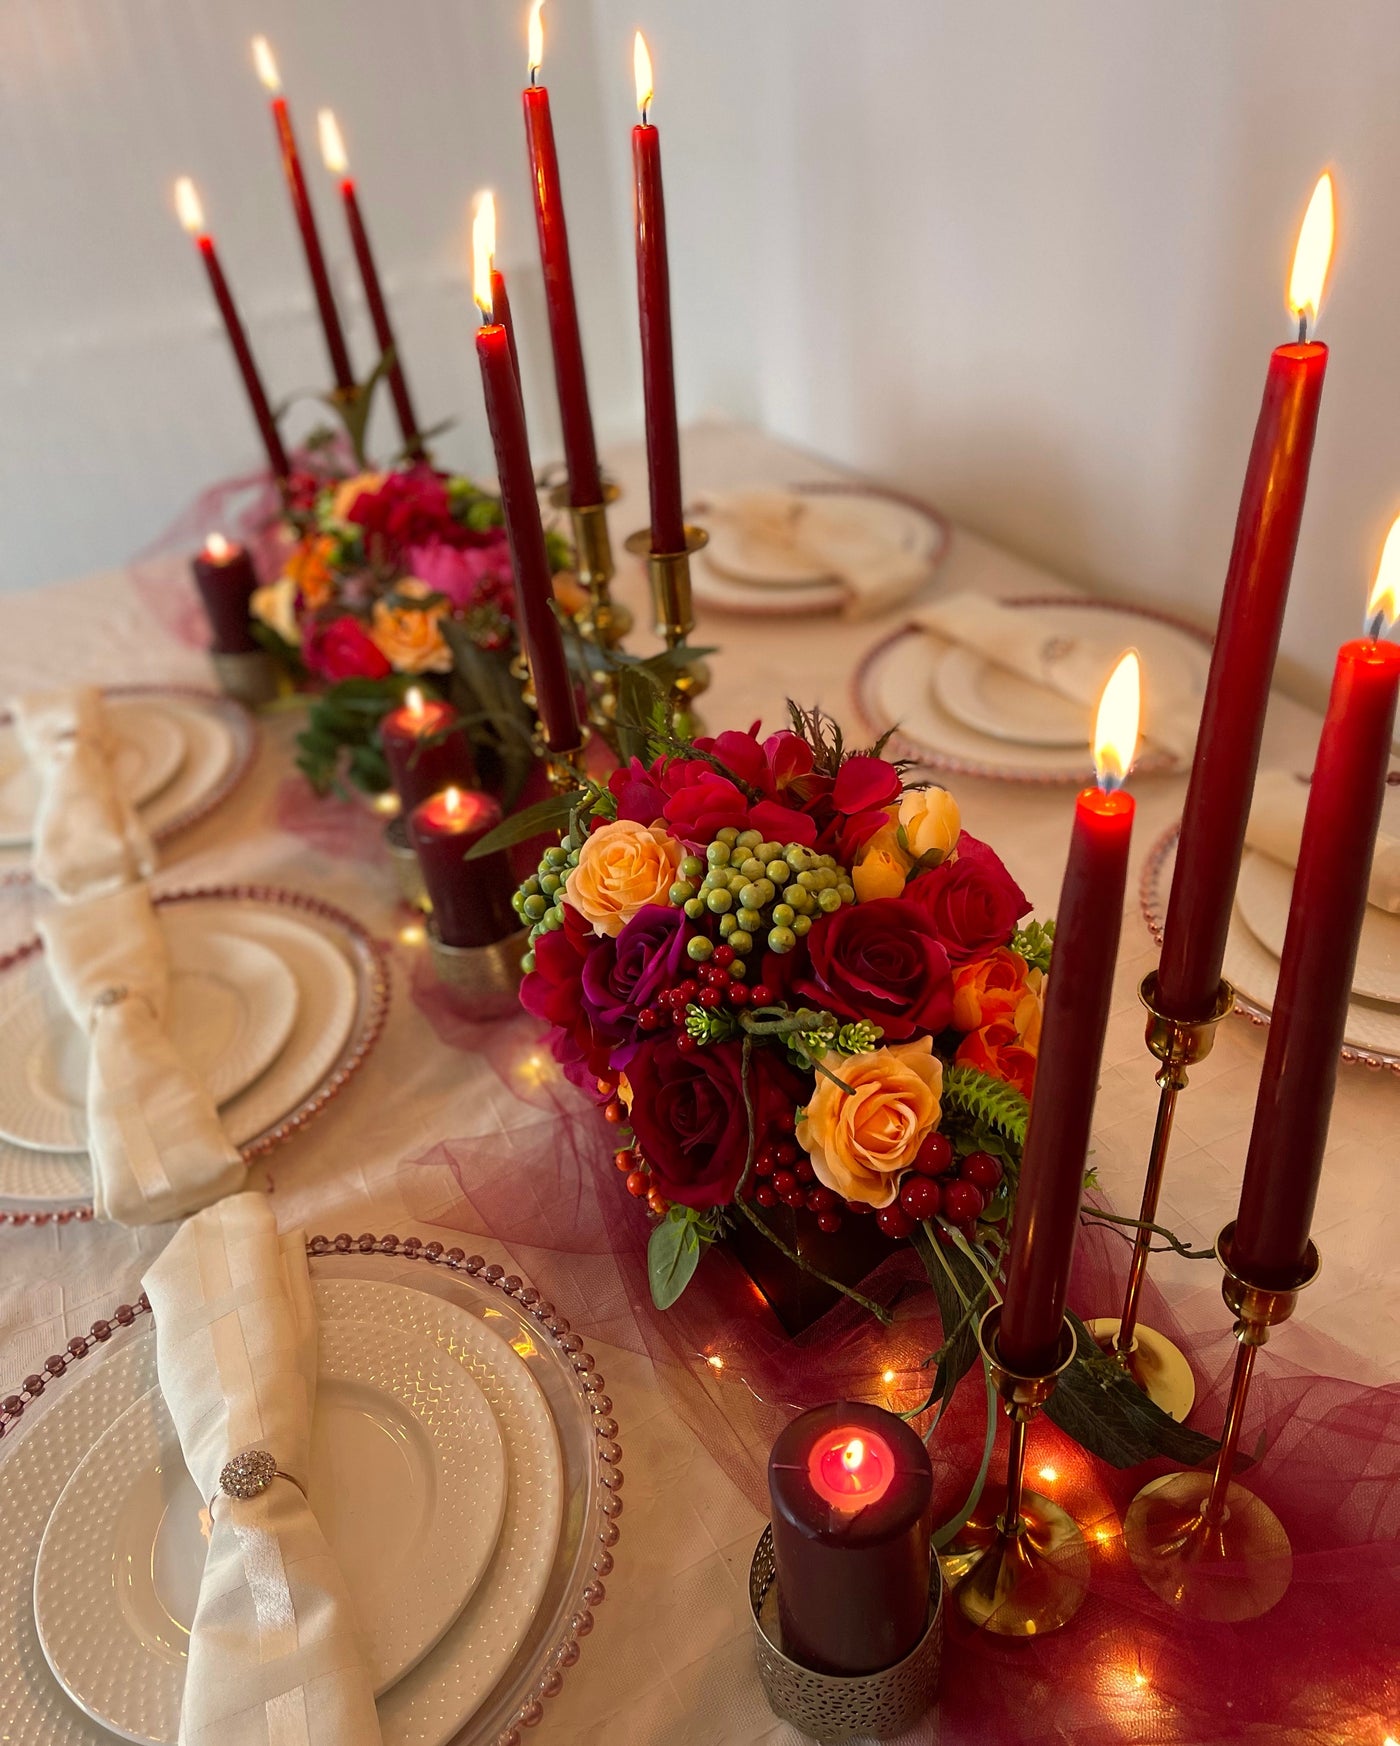 Rent a Rose- Centrepiece- Orange, Burgundy, and Fuchsia- flowers with Olive green berries rent for five days for $54.00.